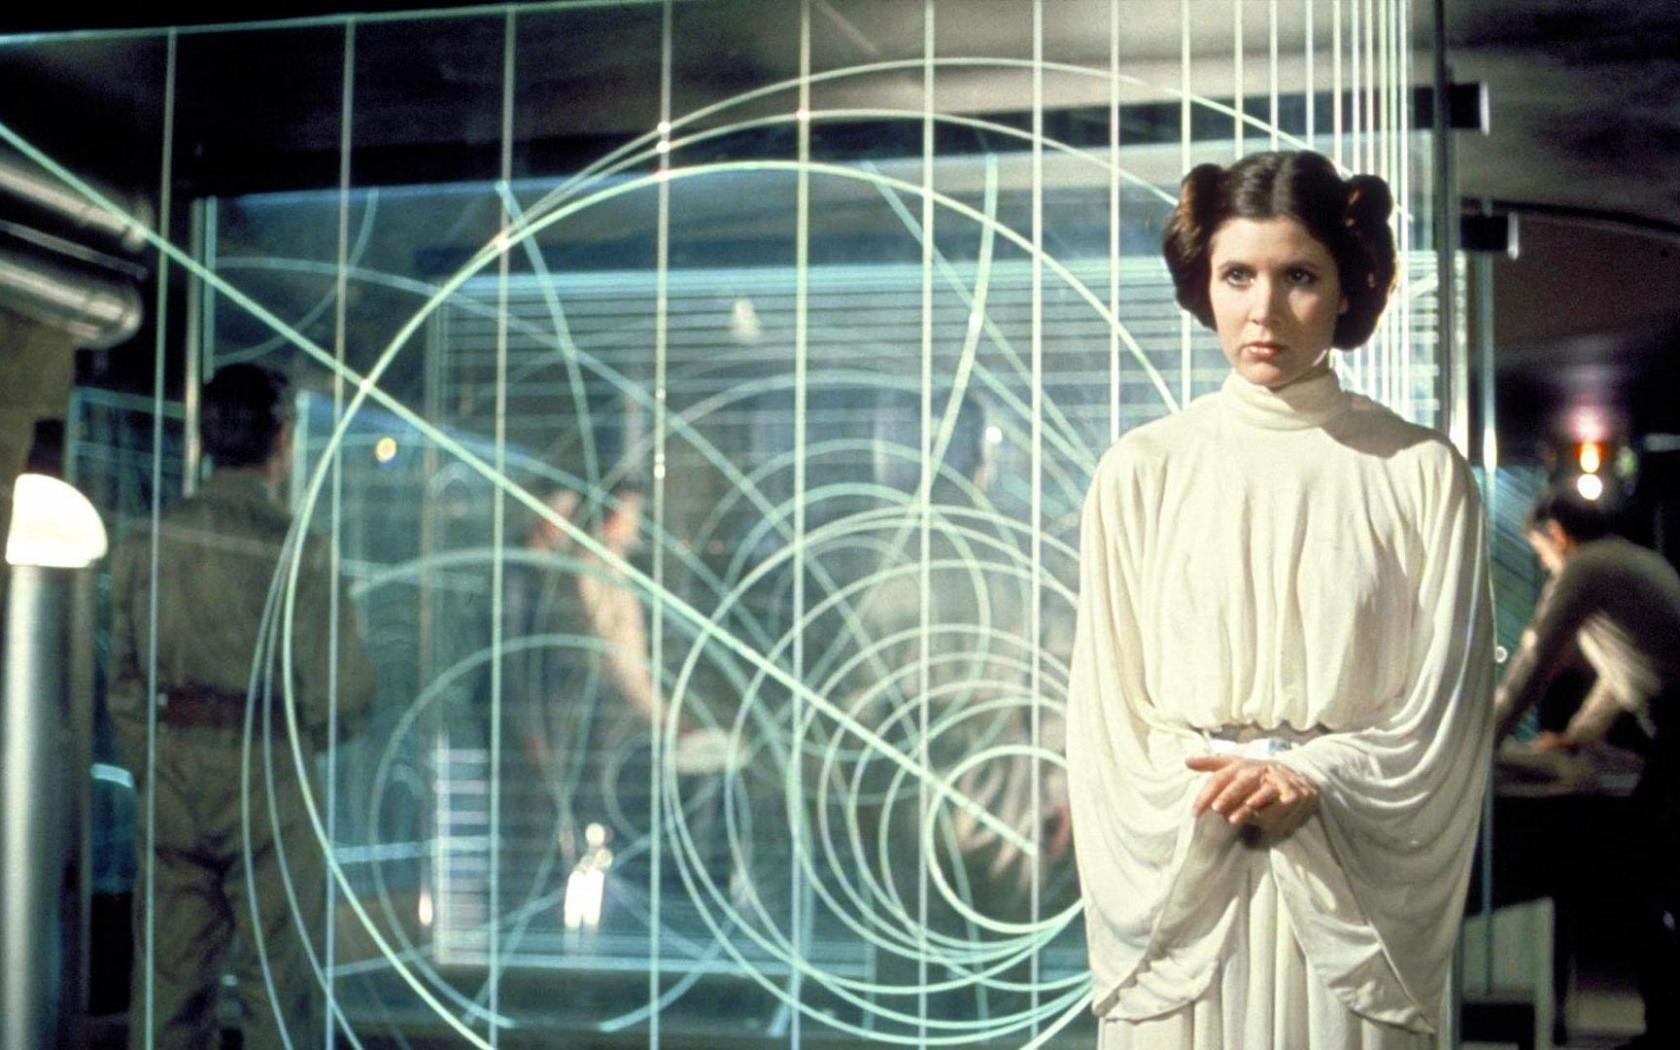 Star Wars Carrie Fisher Princess Leia Leia Organa A New Hope Science Fiction Movies Rebel Alliance 1680x1050